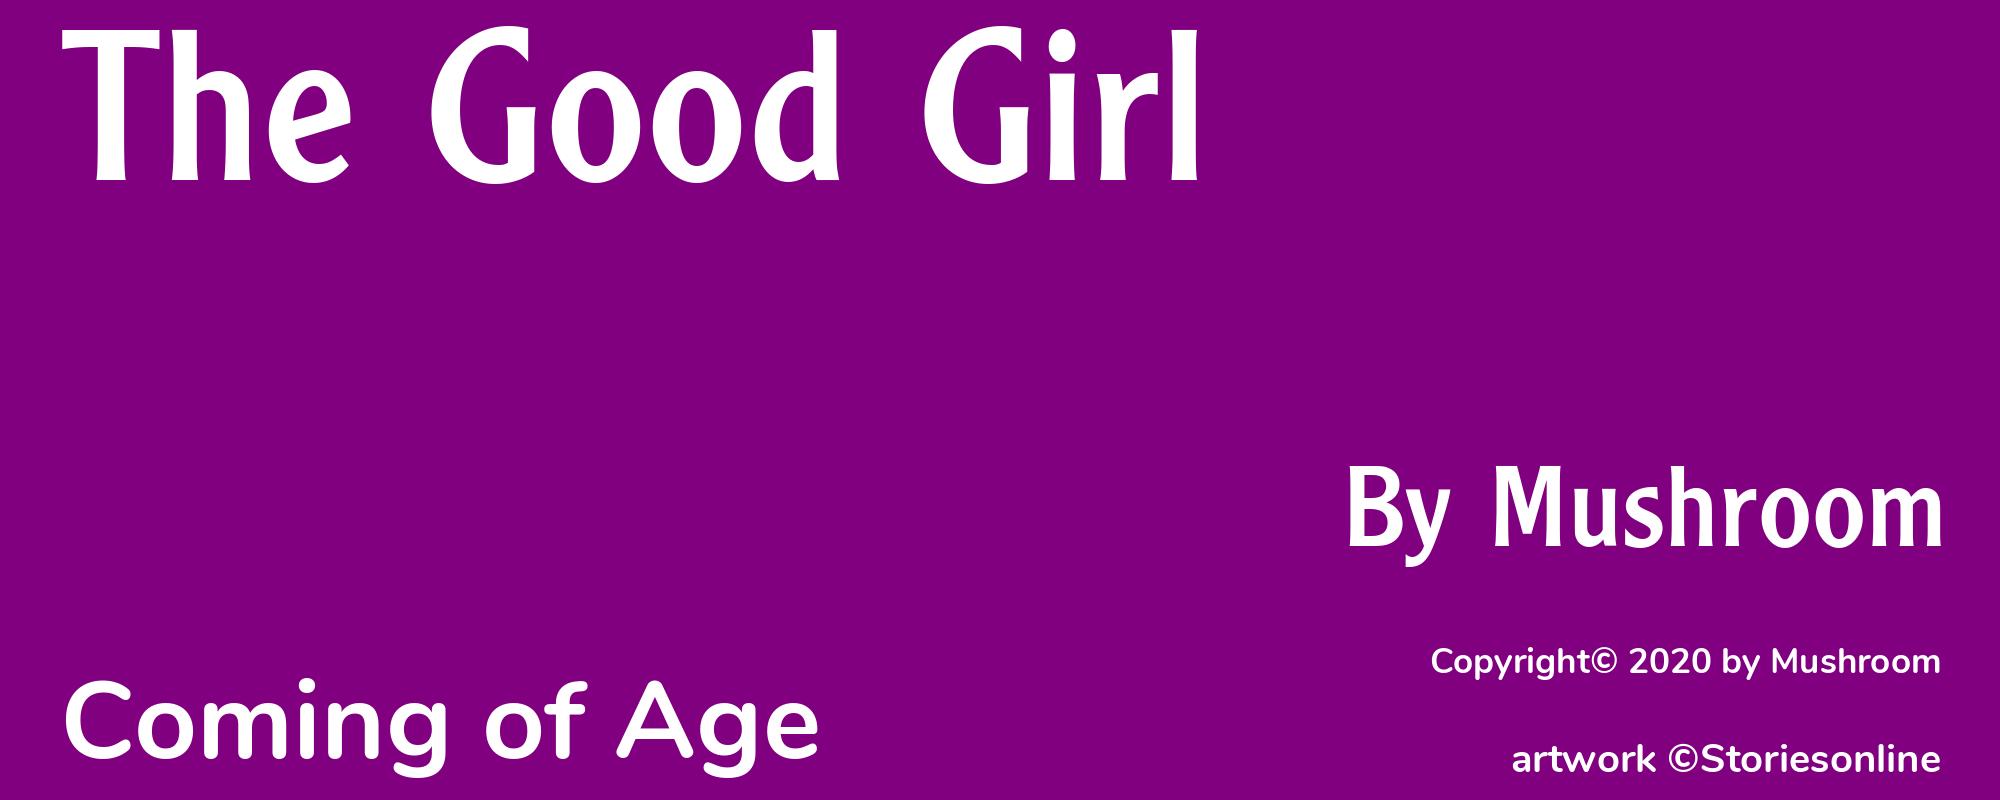 The Good Girl - Cover